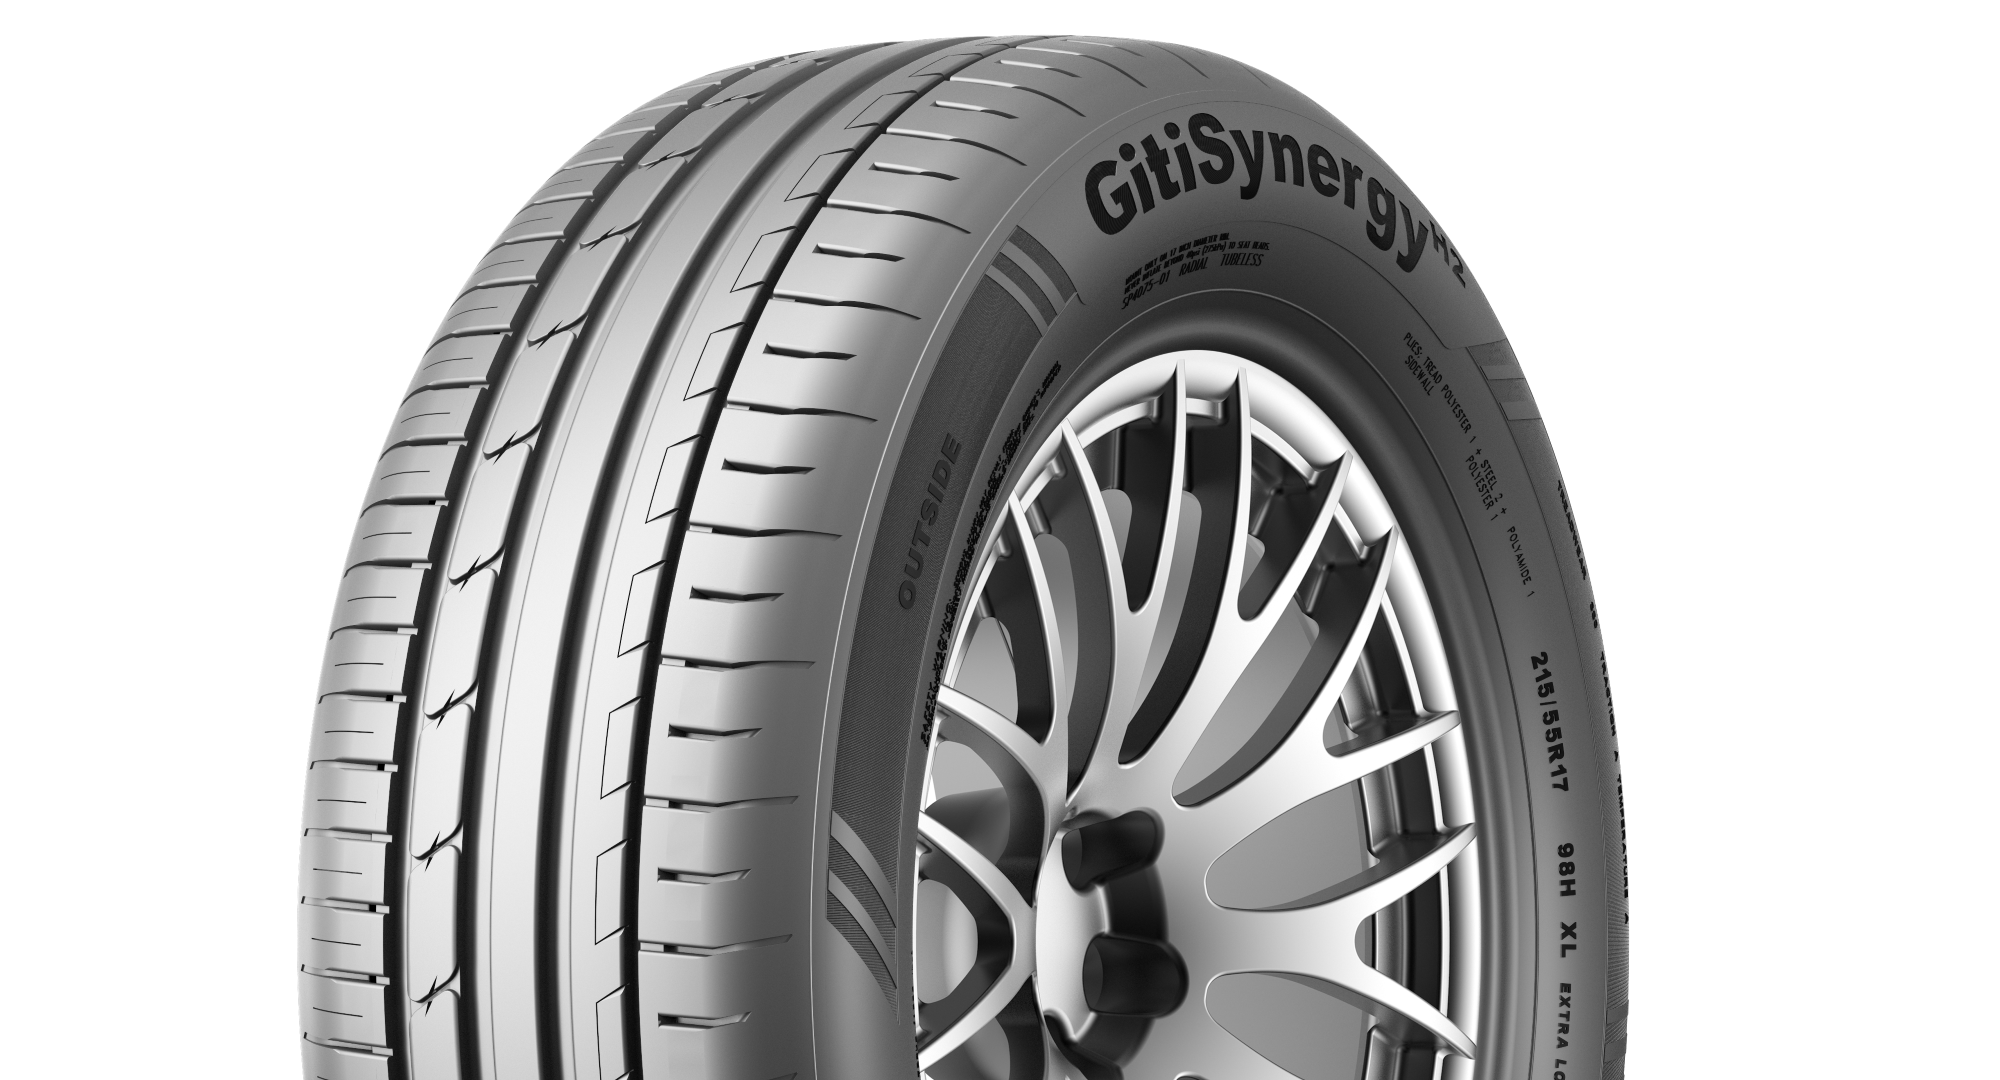 AA-rated GitiSynergyH2 selected in second size for VW Caddy 5 OE fitment